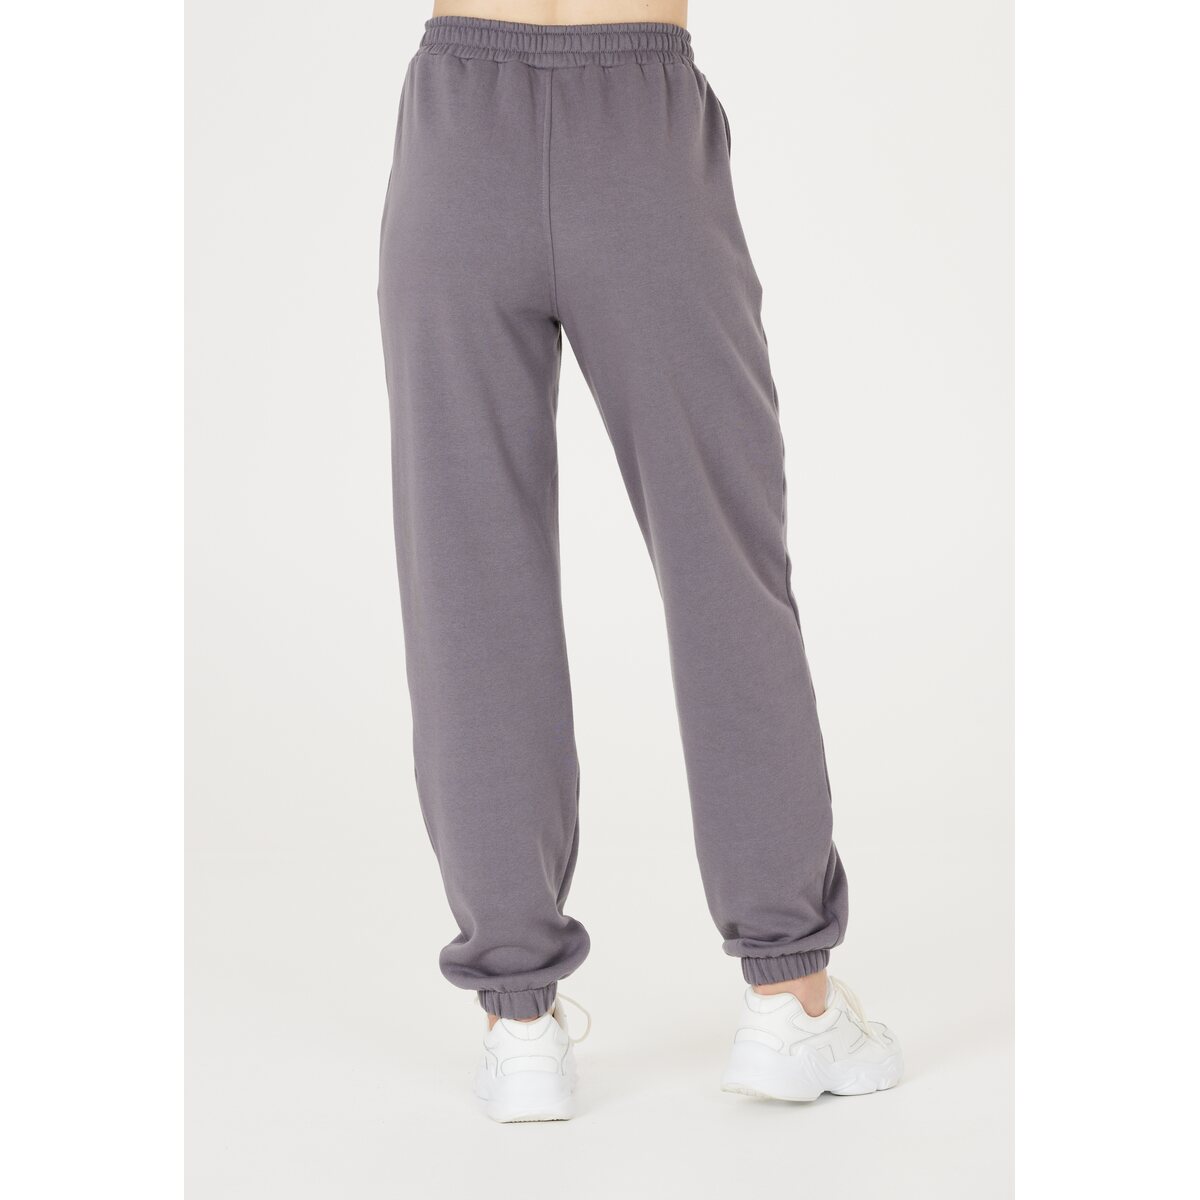 Athlecia Ruthie Womenswear Sweat Pants 4 Shaws Department Stores